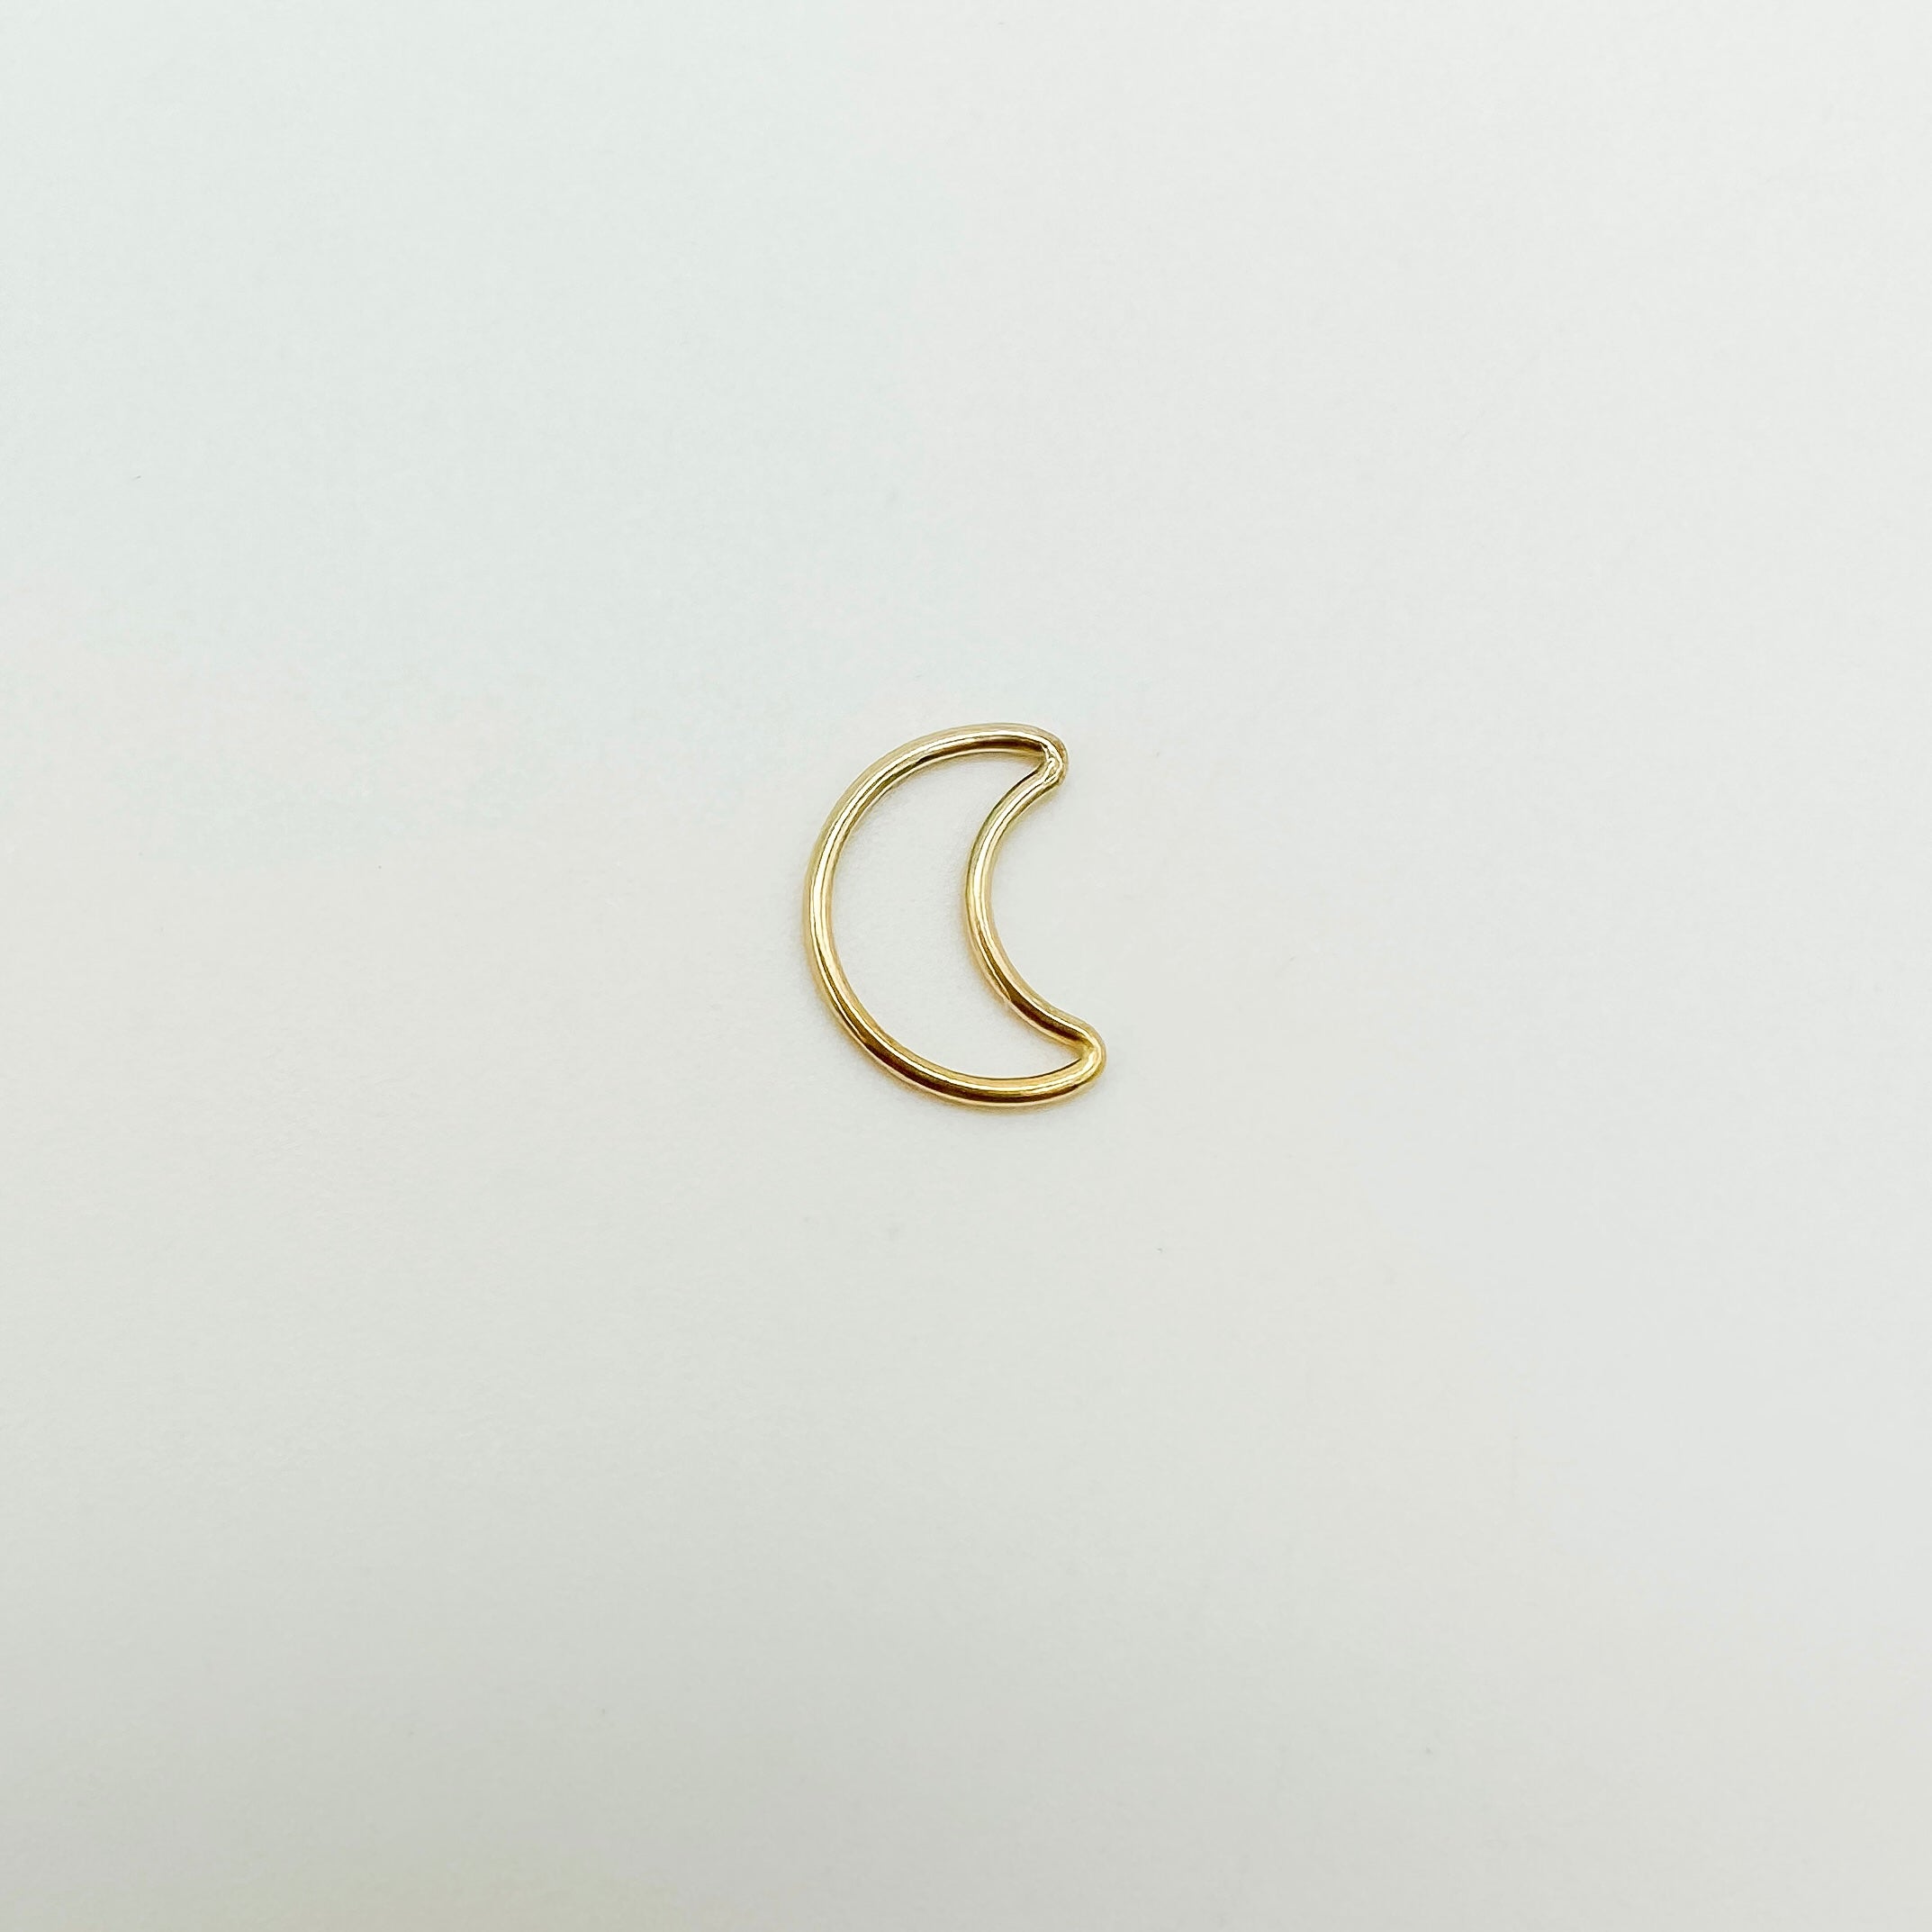 moon connector / permanent jewelry supplier / permanent jewelry supplies / gold filled connector / permanent jewelry connector / gold filled moon charm / moon connector